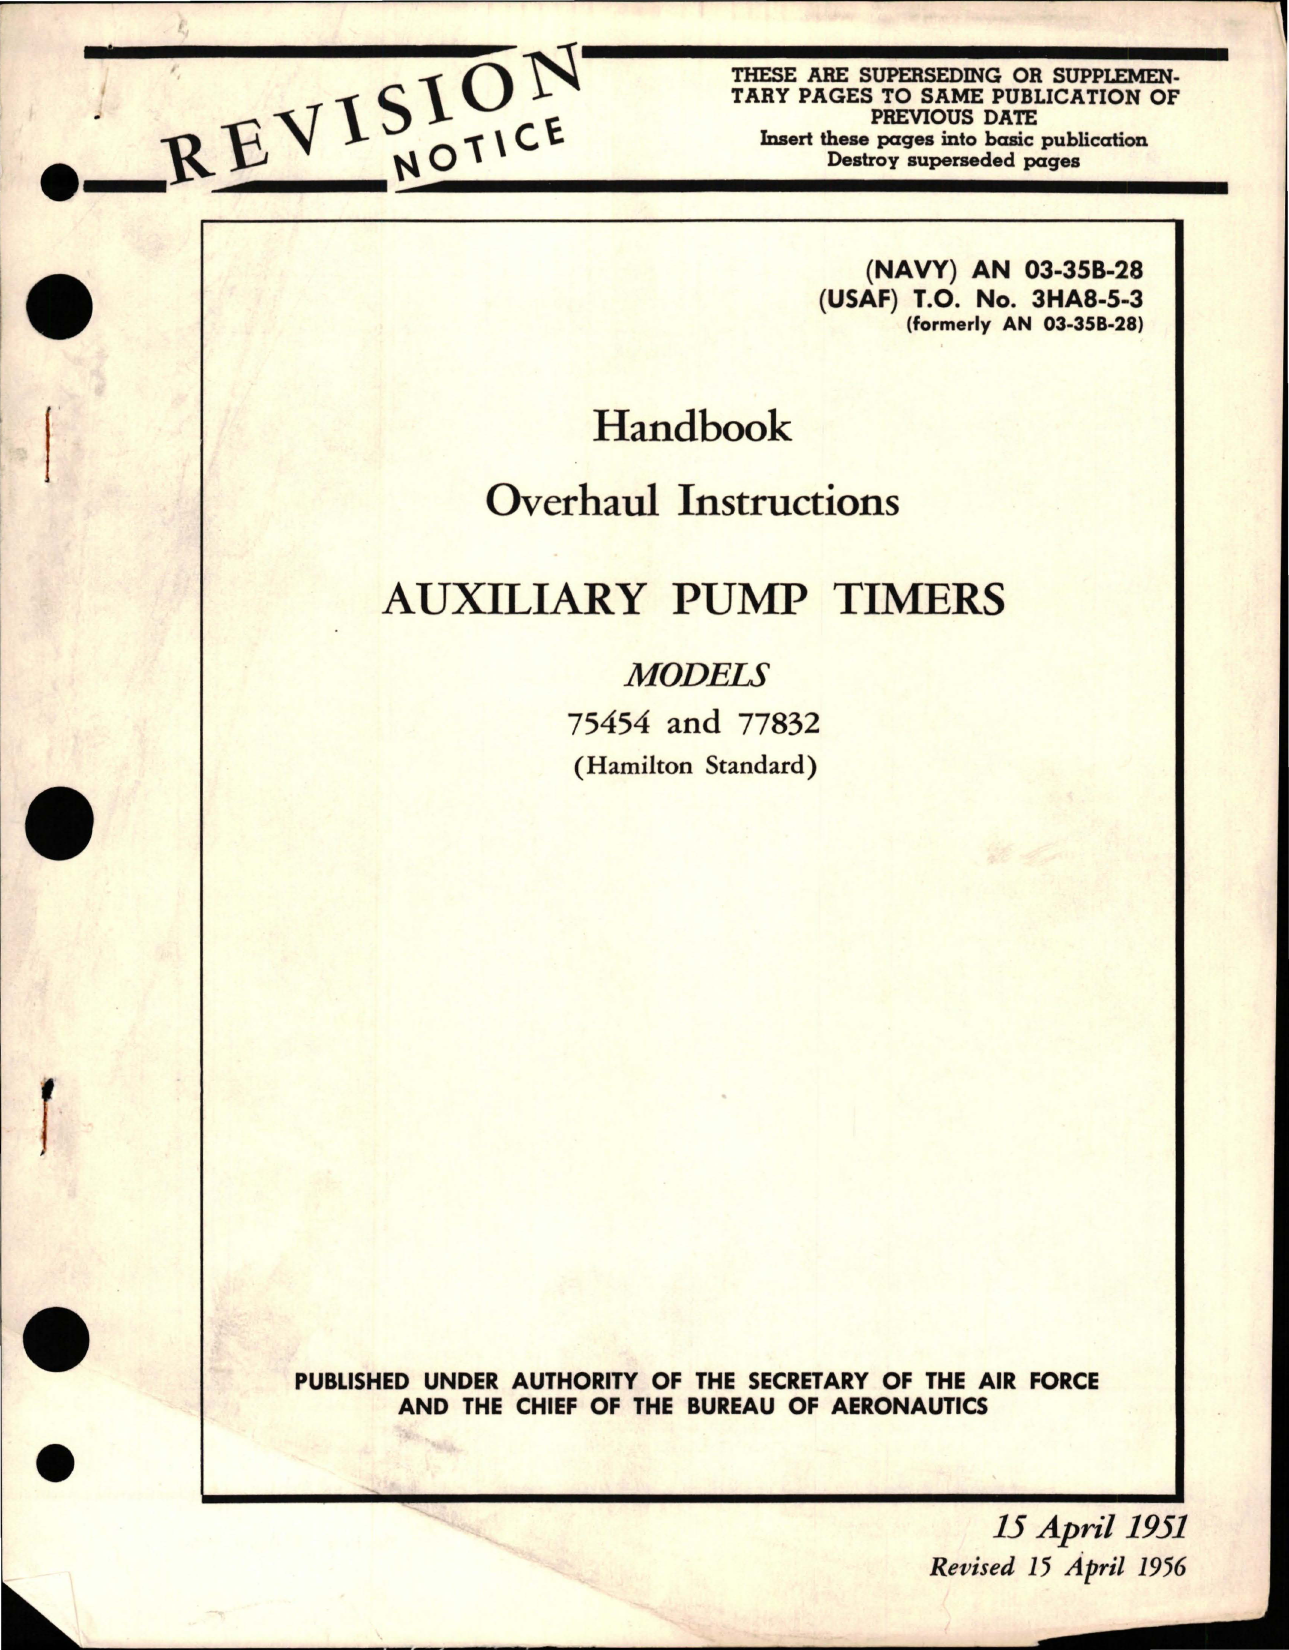 Sample page 1 from AirCorps Library document: Overhaul Instructions for Auxiliary Pump Timers - Models 75454 and 77832 